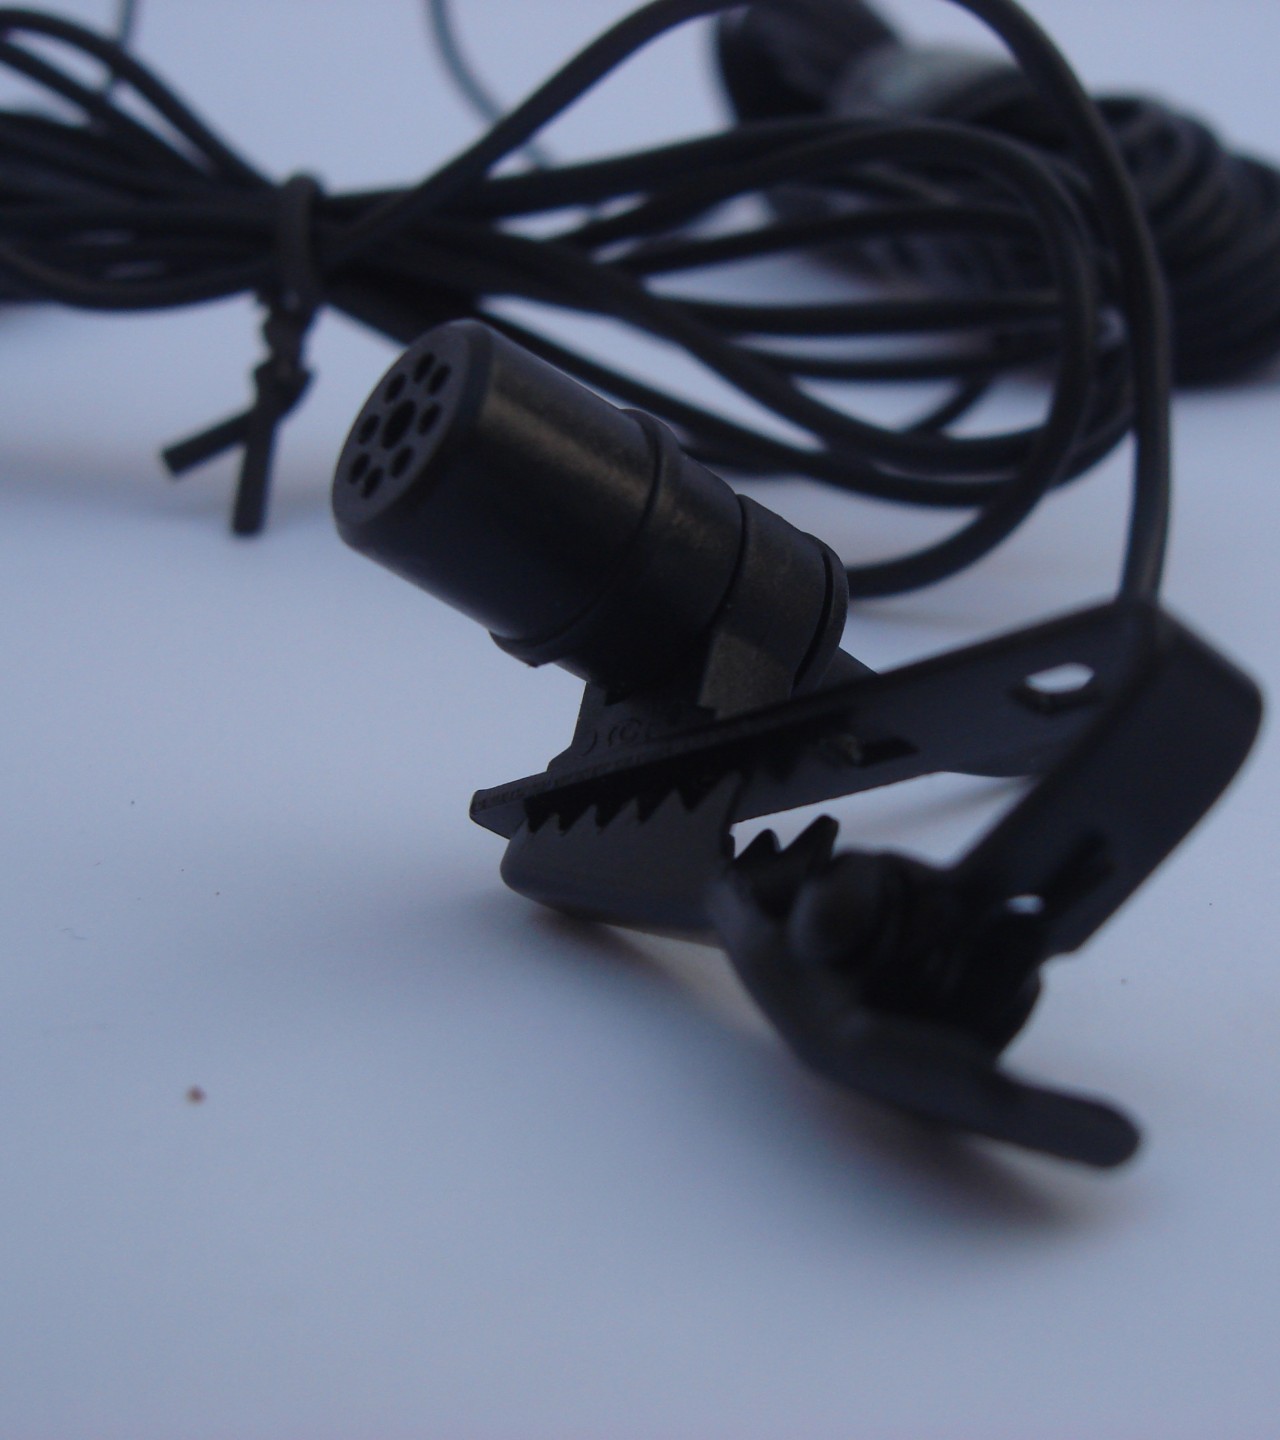 Boya BY-M1 Lavalier Microphone for Smartphones, DSLR Cameras, Camcorders and Audio Recorder PC